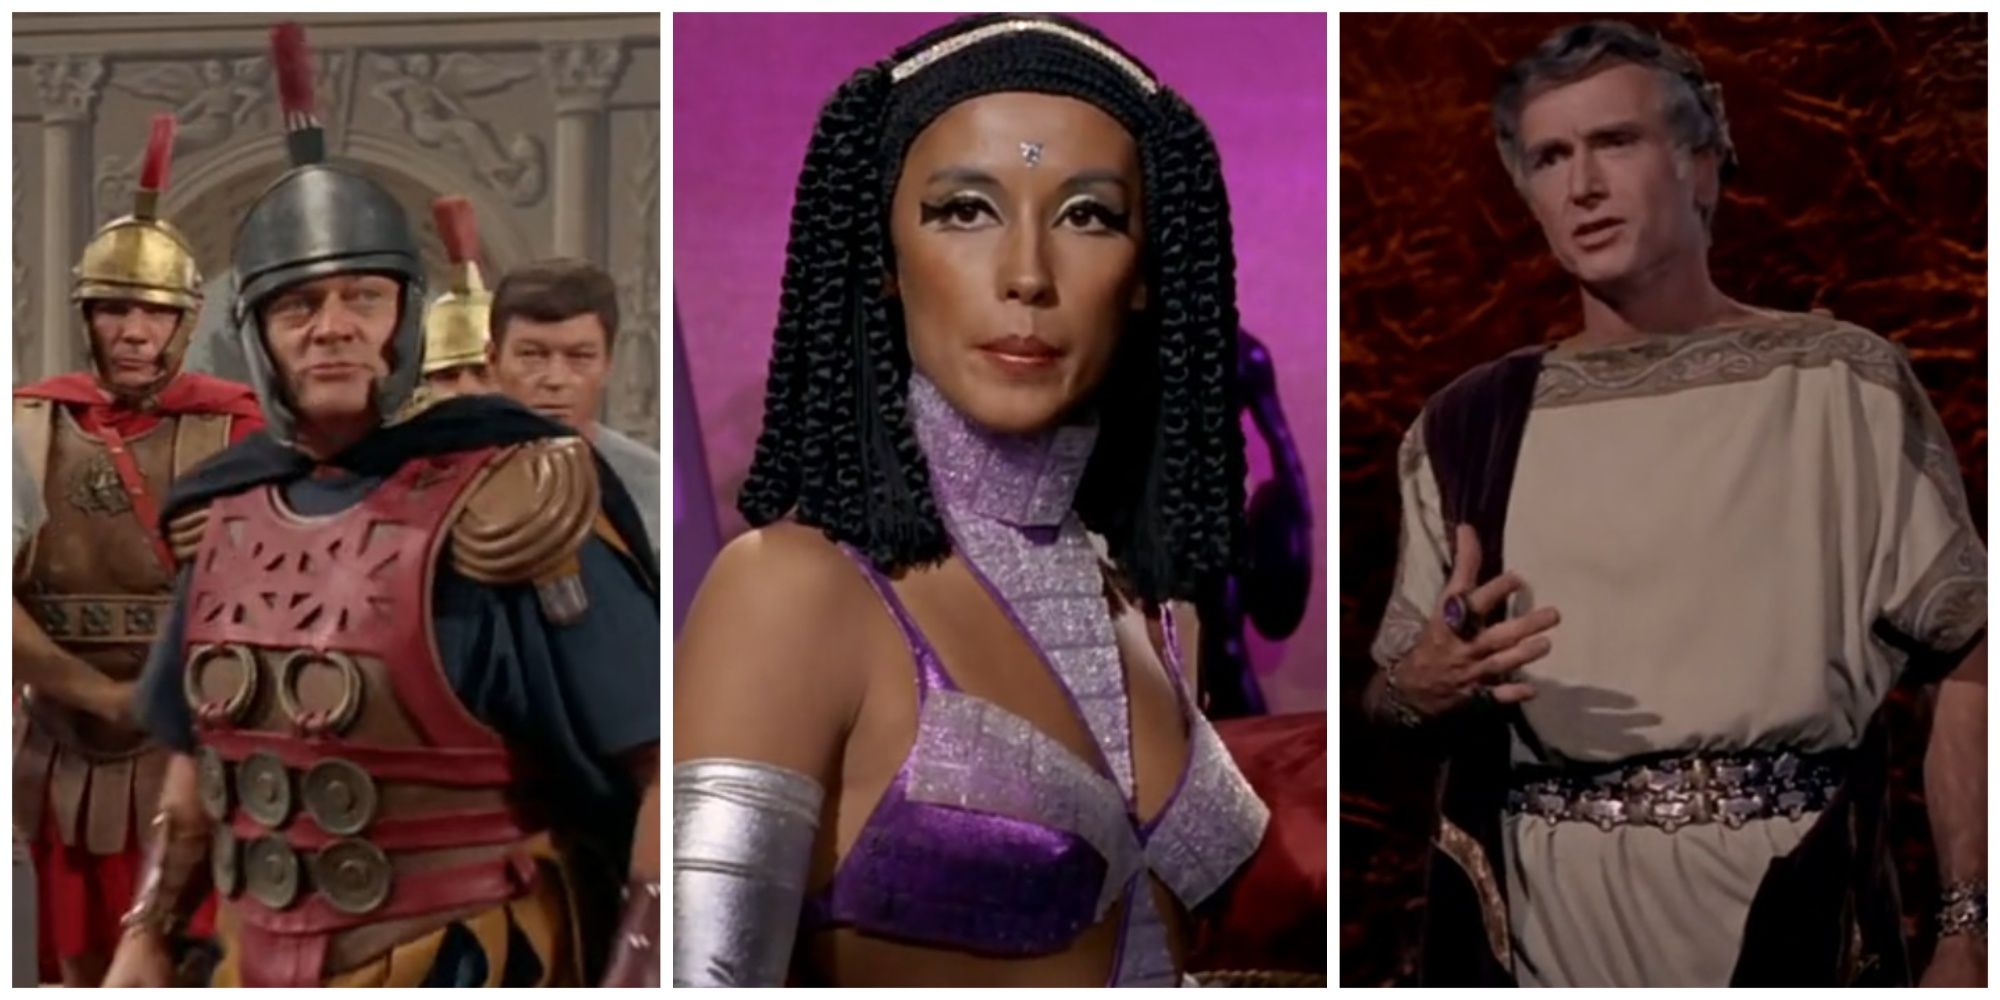 Split image showing images from three Star Trek episodes (